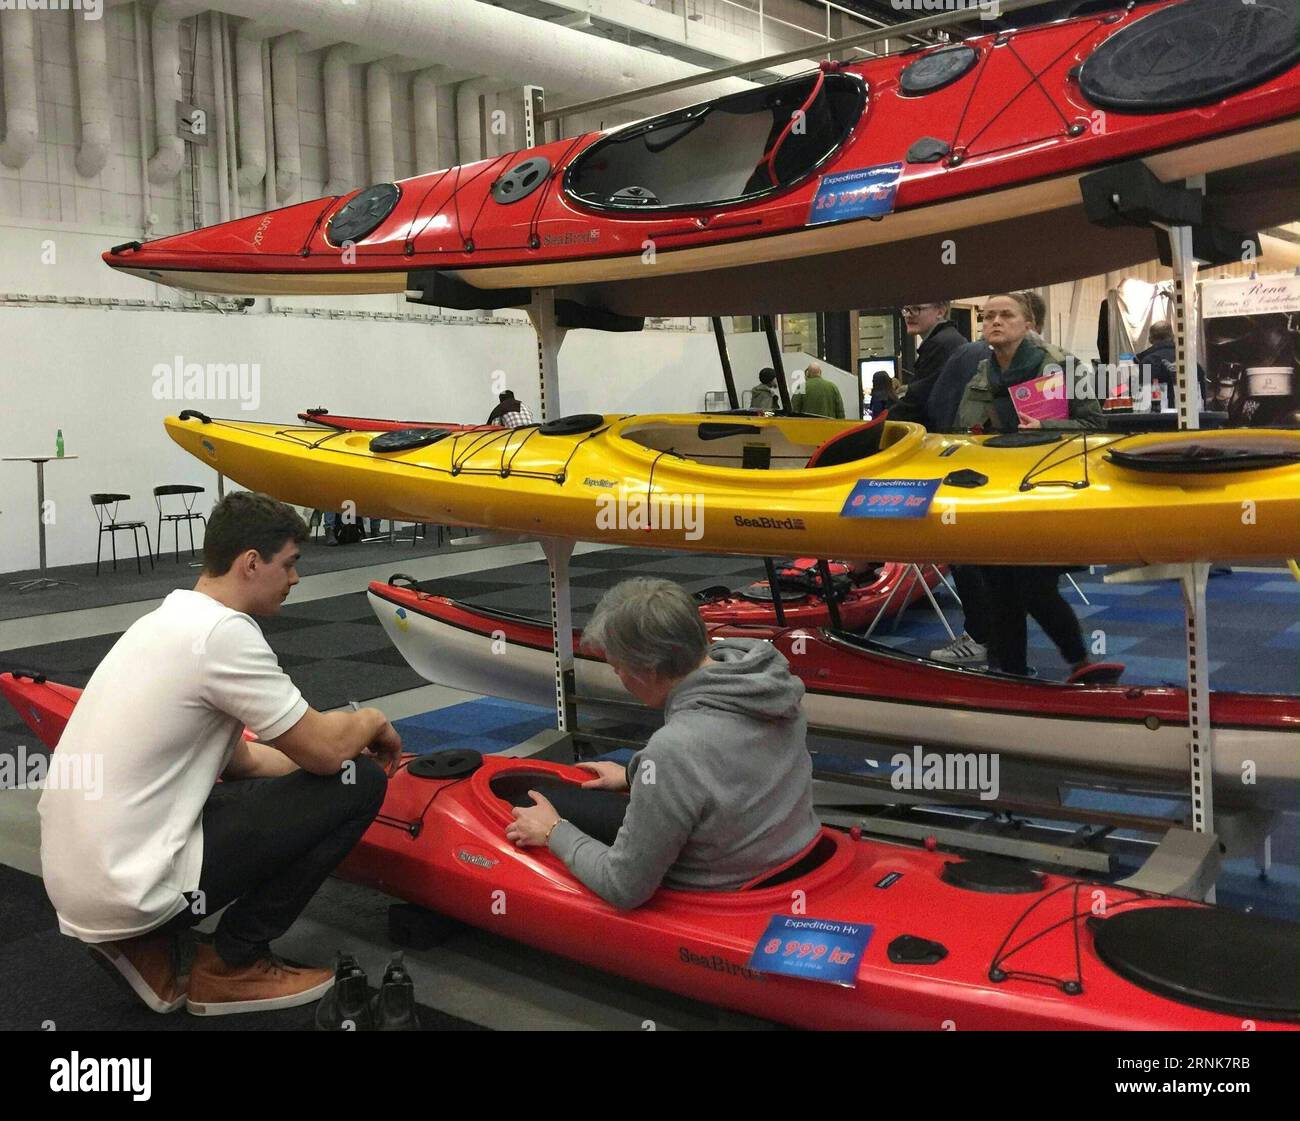 STOCKHOLM, A Swede experiences a SeaBird kayak at the 2017 Swedish Outdoor  Show in Stockholm, capital of Sweden, on March 11, 2017. The show, held  from March 10 to March 12, is